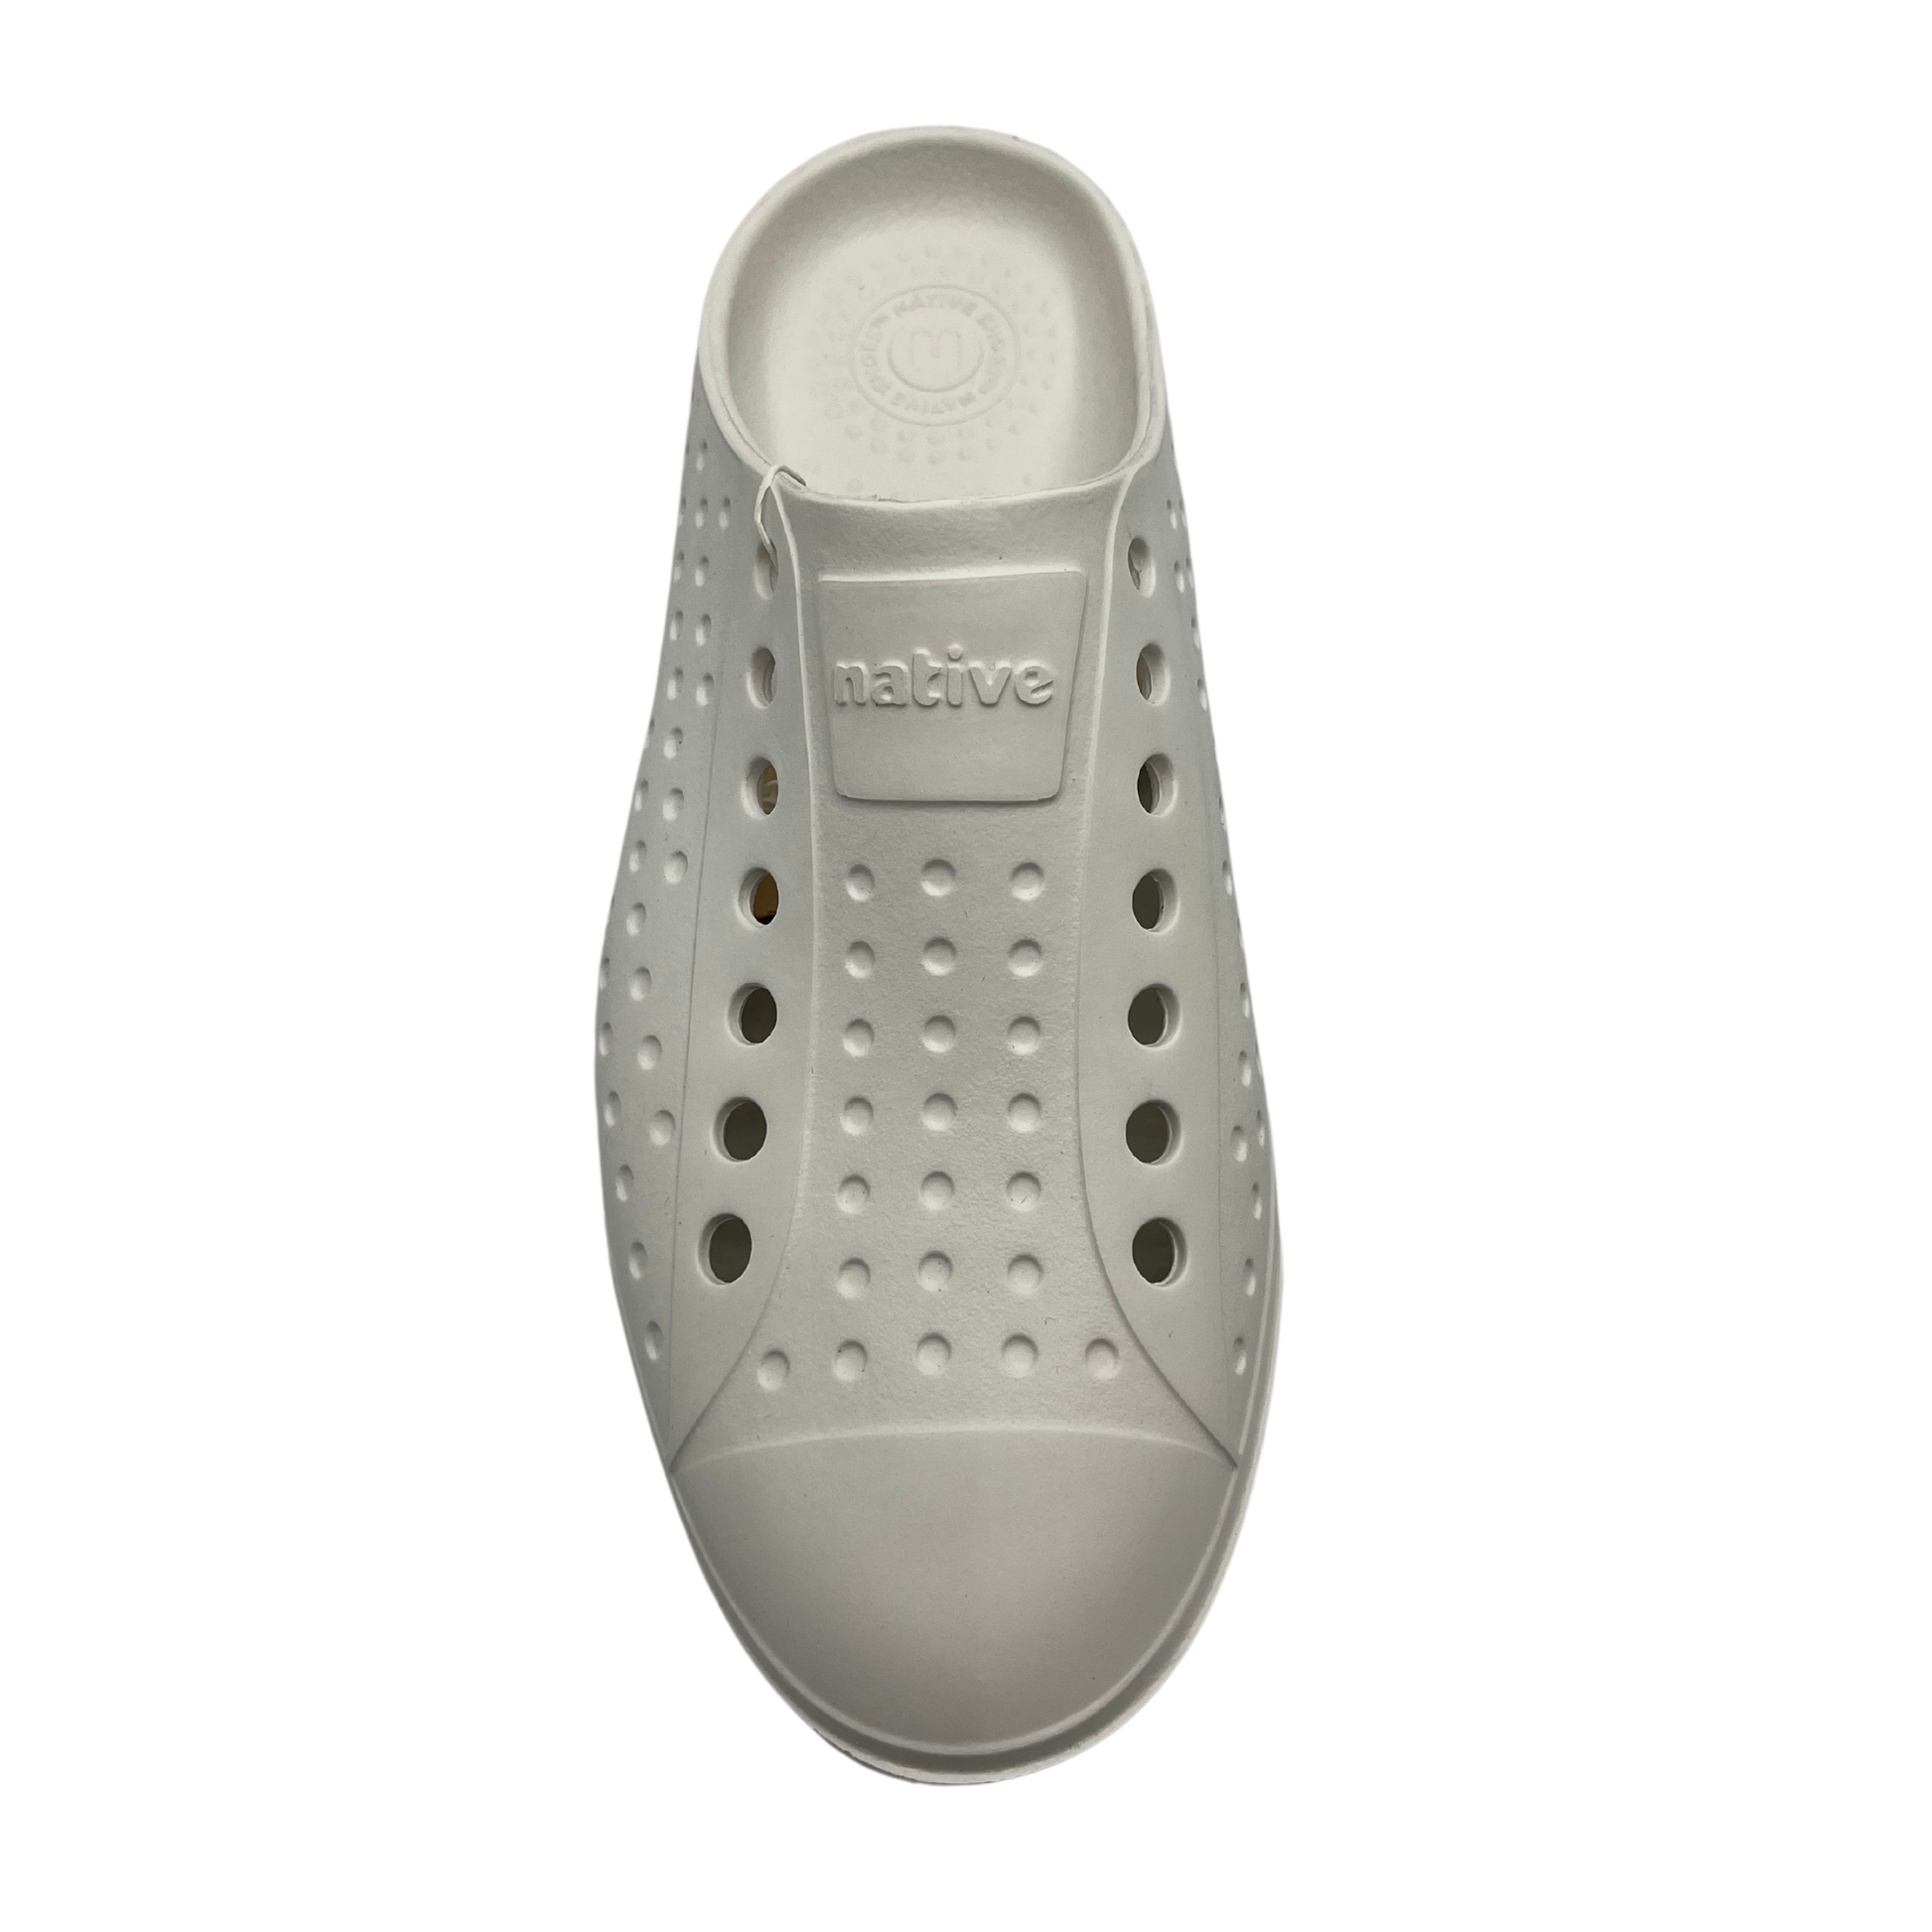 Top view of white slip on summer shoe. Perforated upper and rounded toe